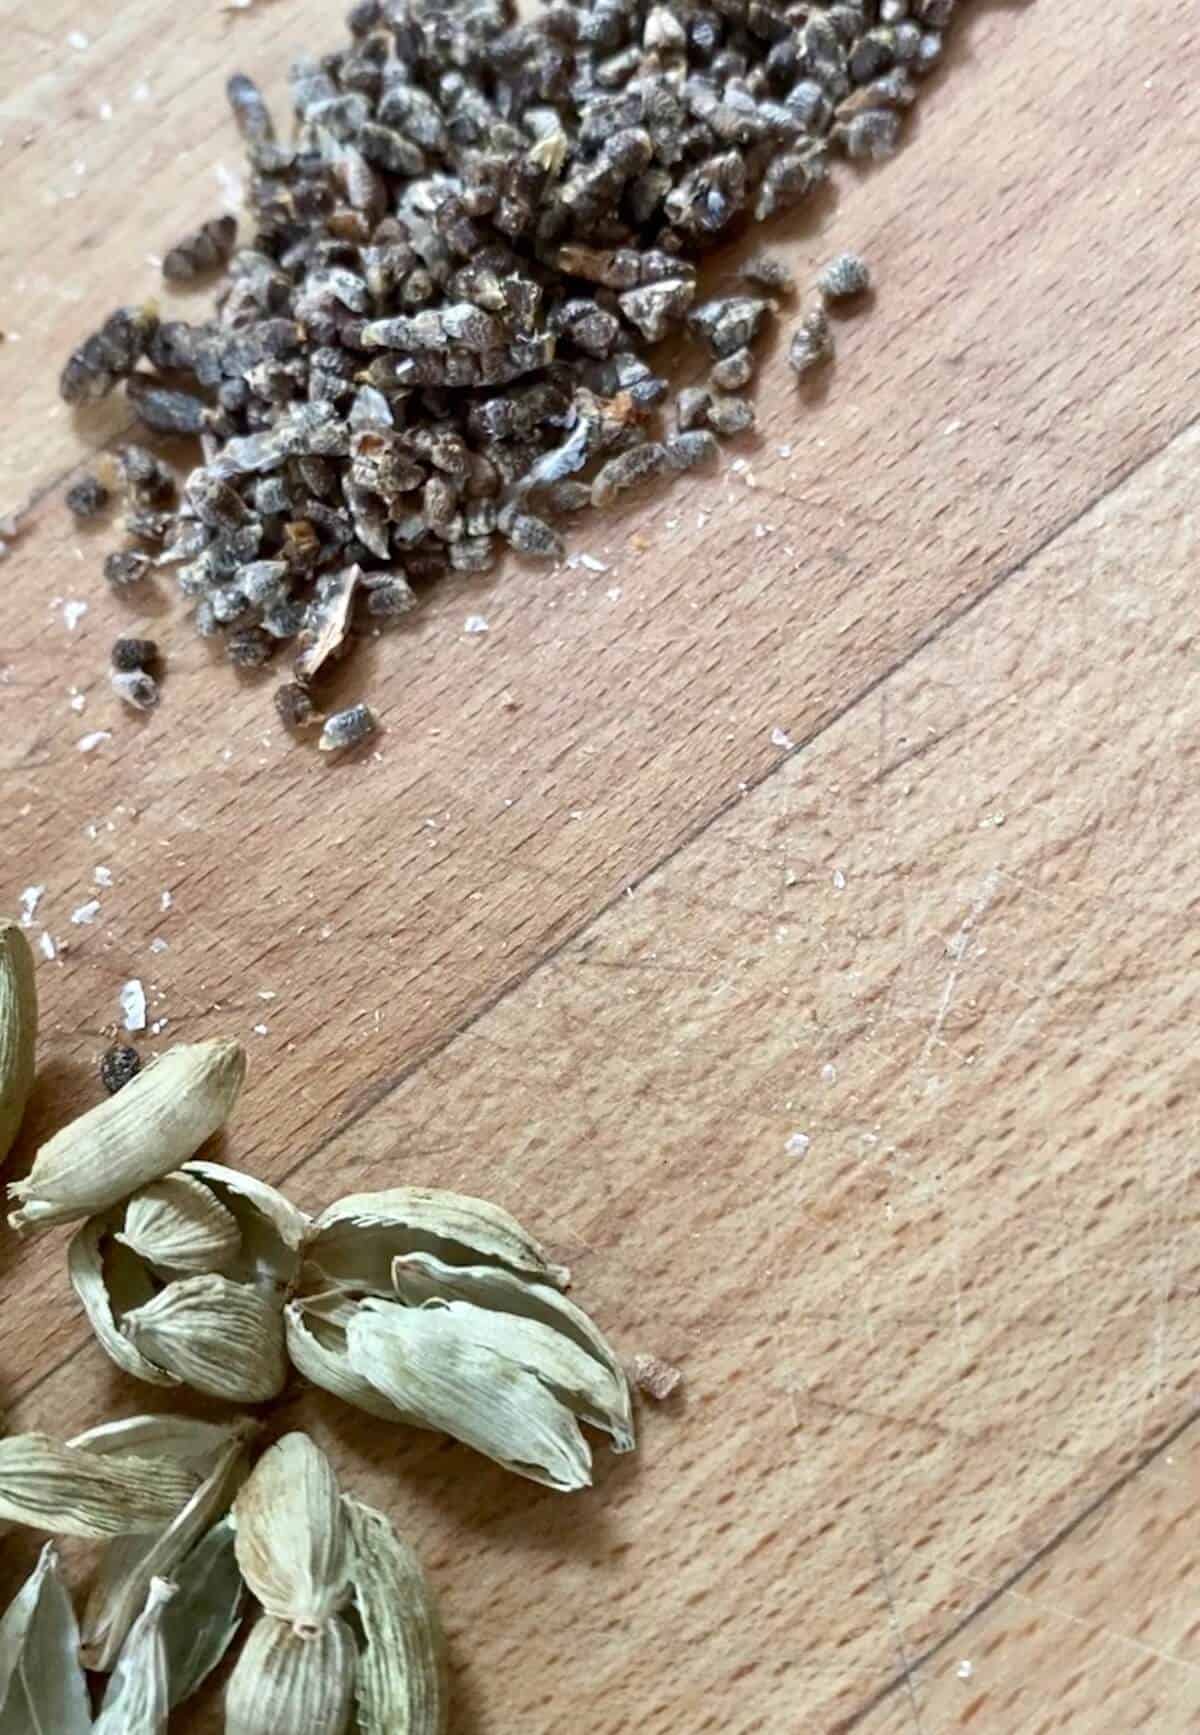 Cardamom pods split open and their seeds in a pile next to them. 